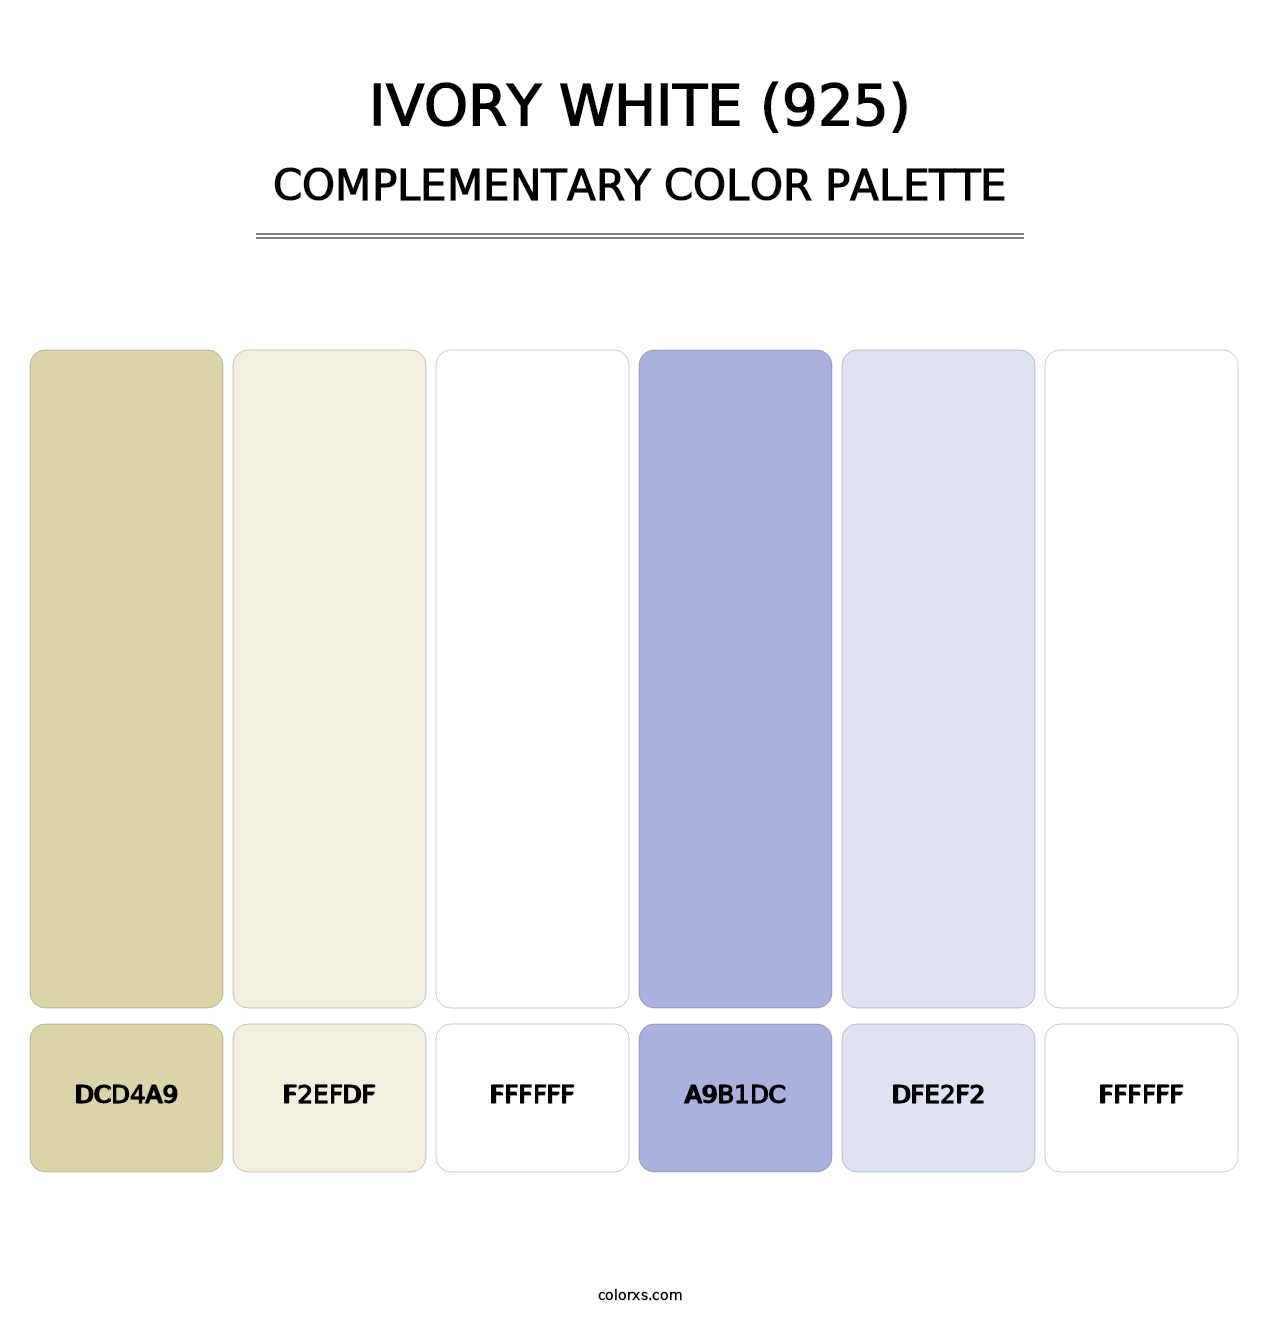 Ivory White (925) - Complementary Color Palette